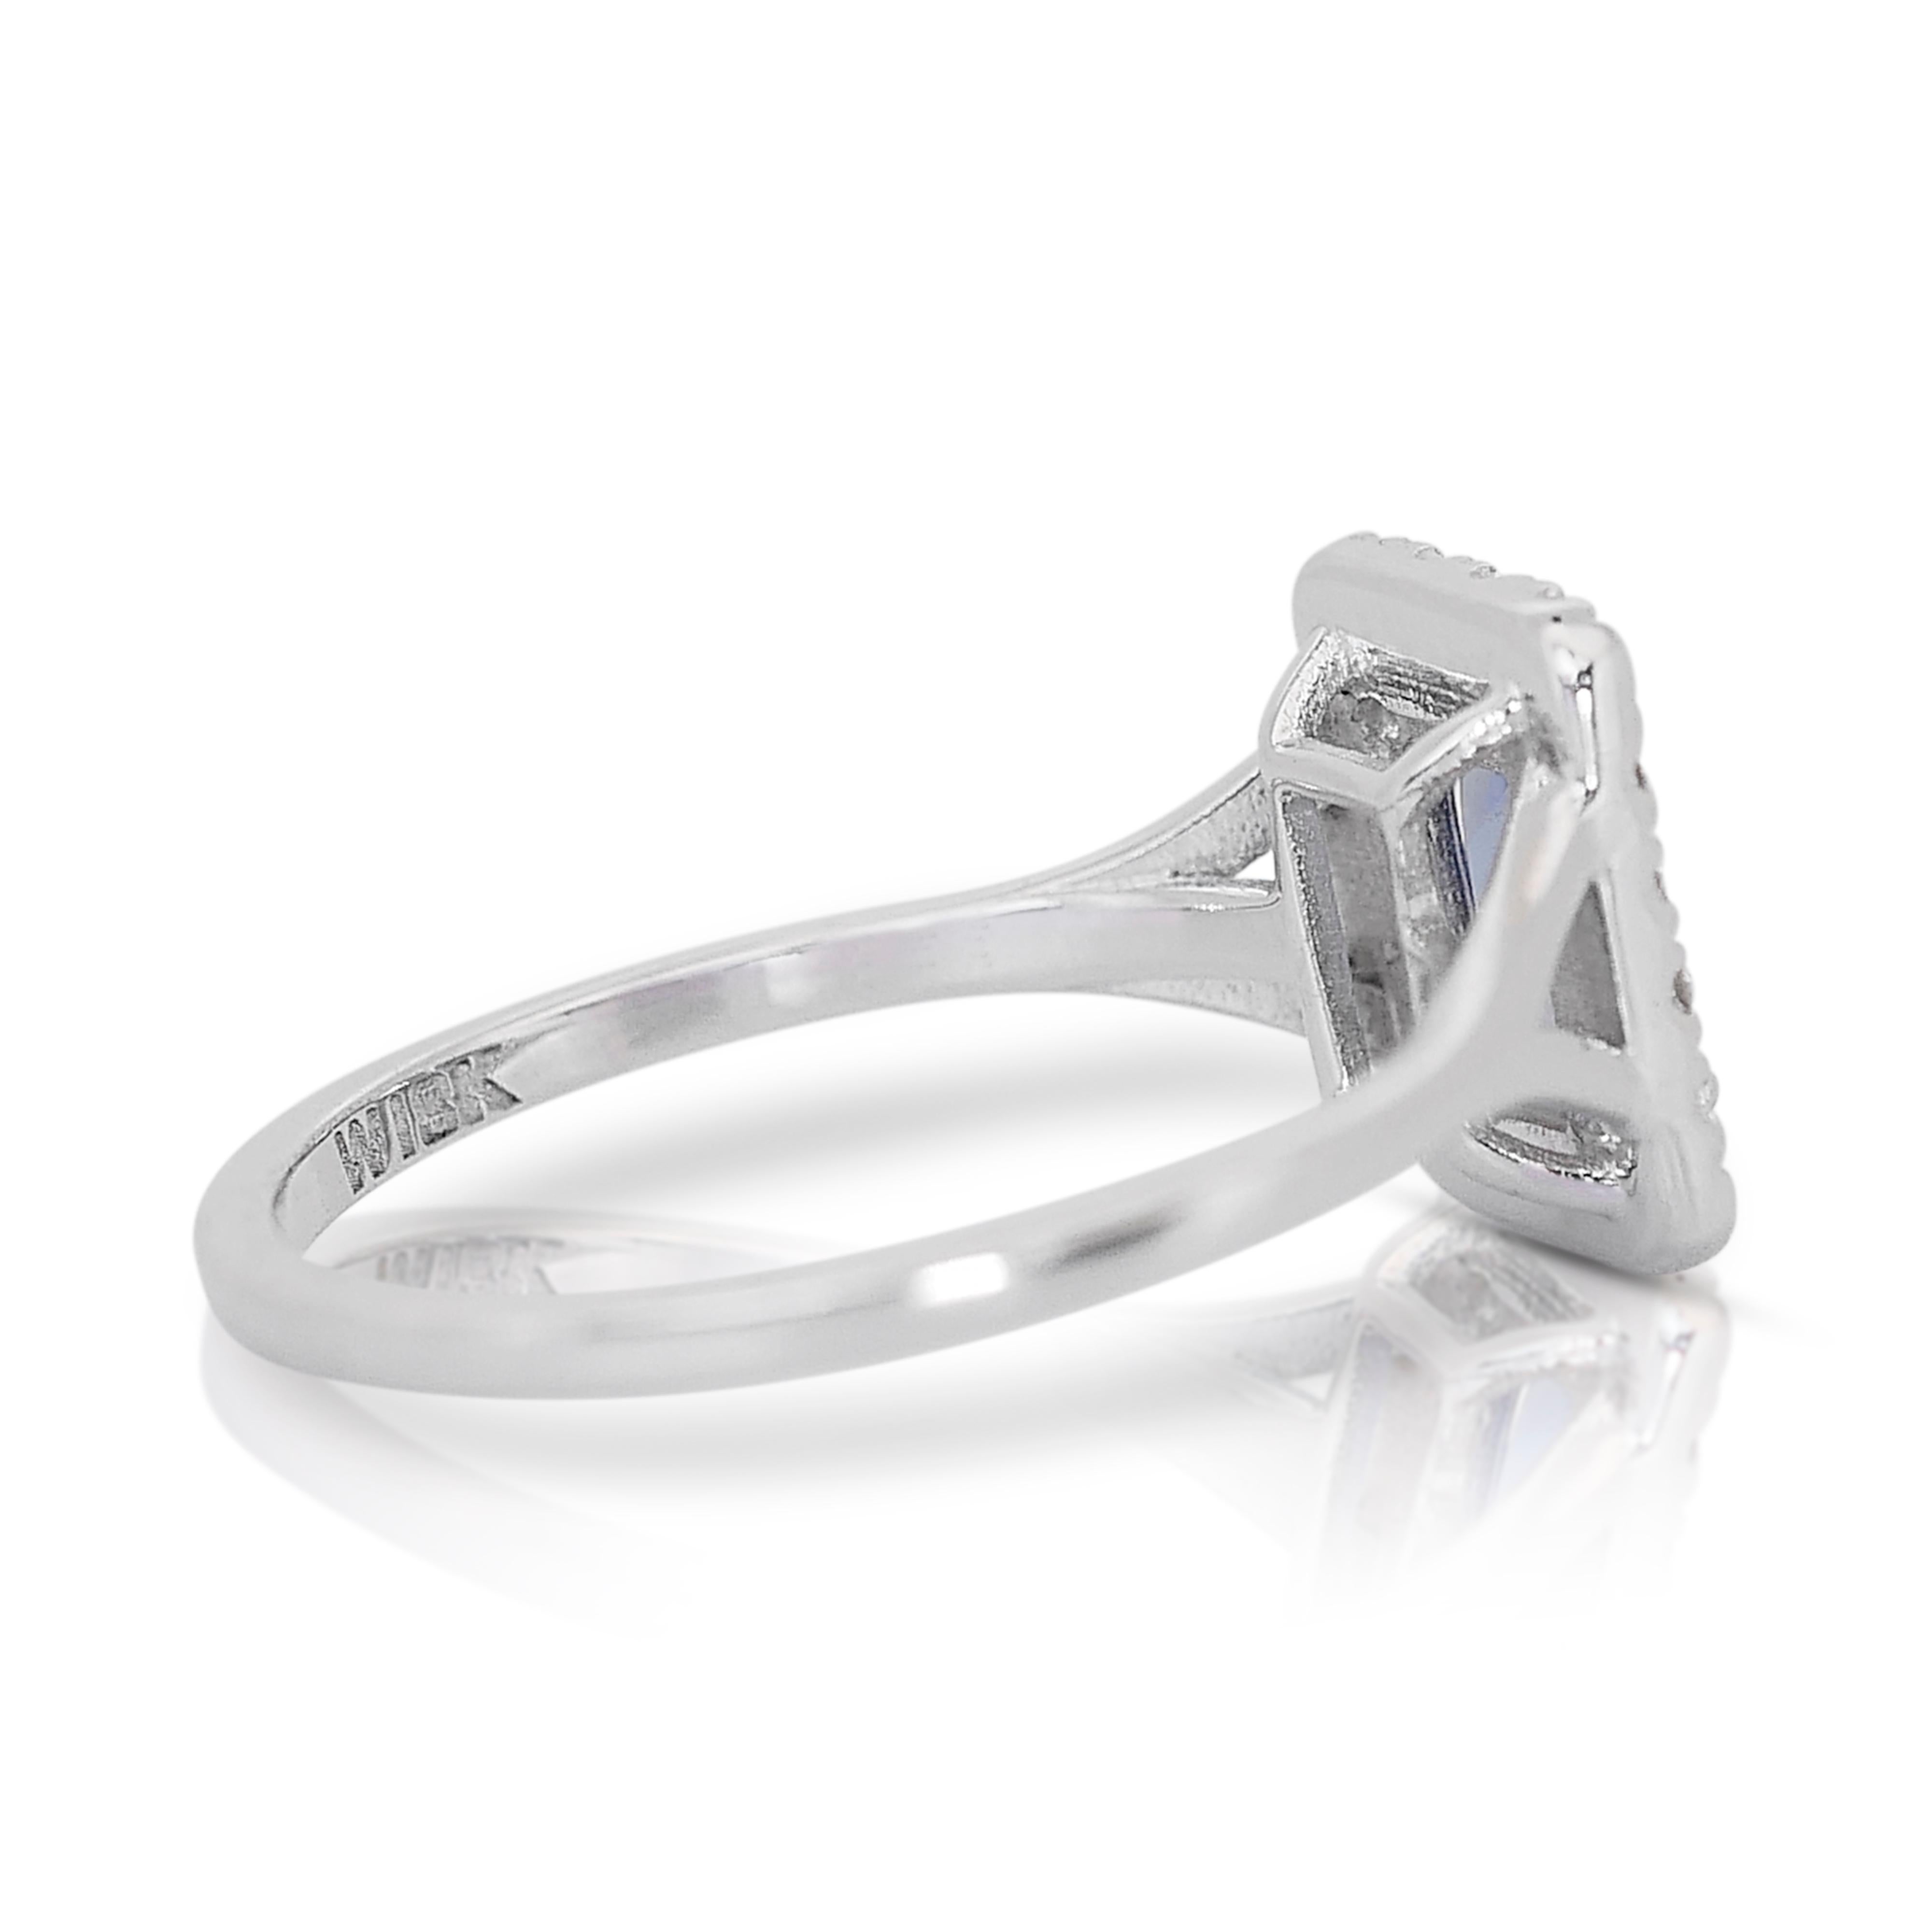 Enchanting 0.93ct Tanzanite and Diamonds Halo Ring in 18k White Gold - IGI  In New Condition For Sale In רמת גן, IL